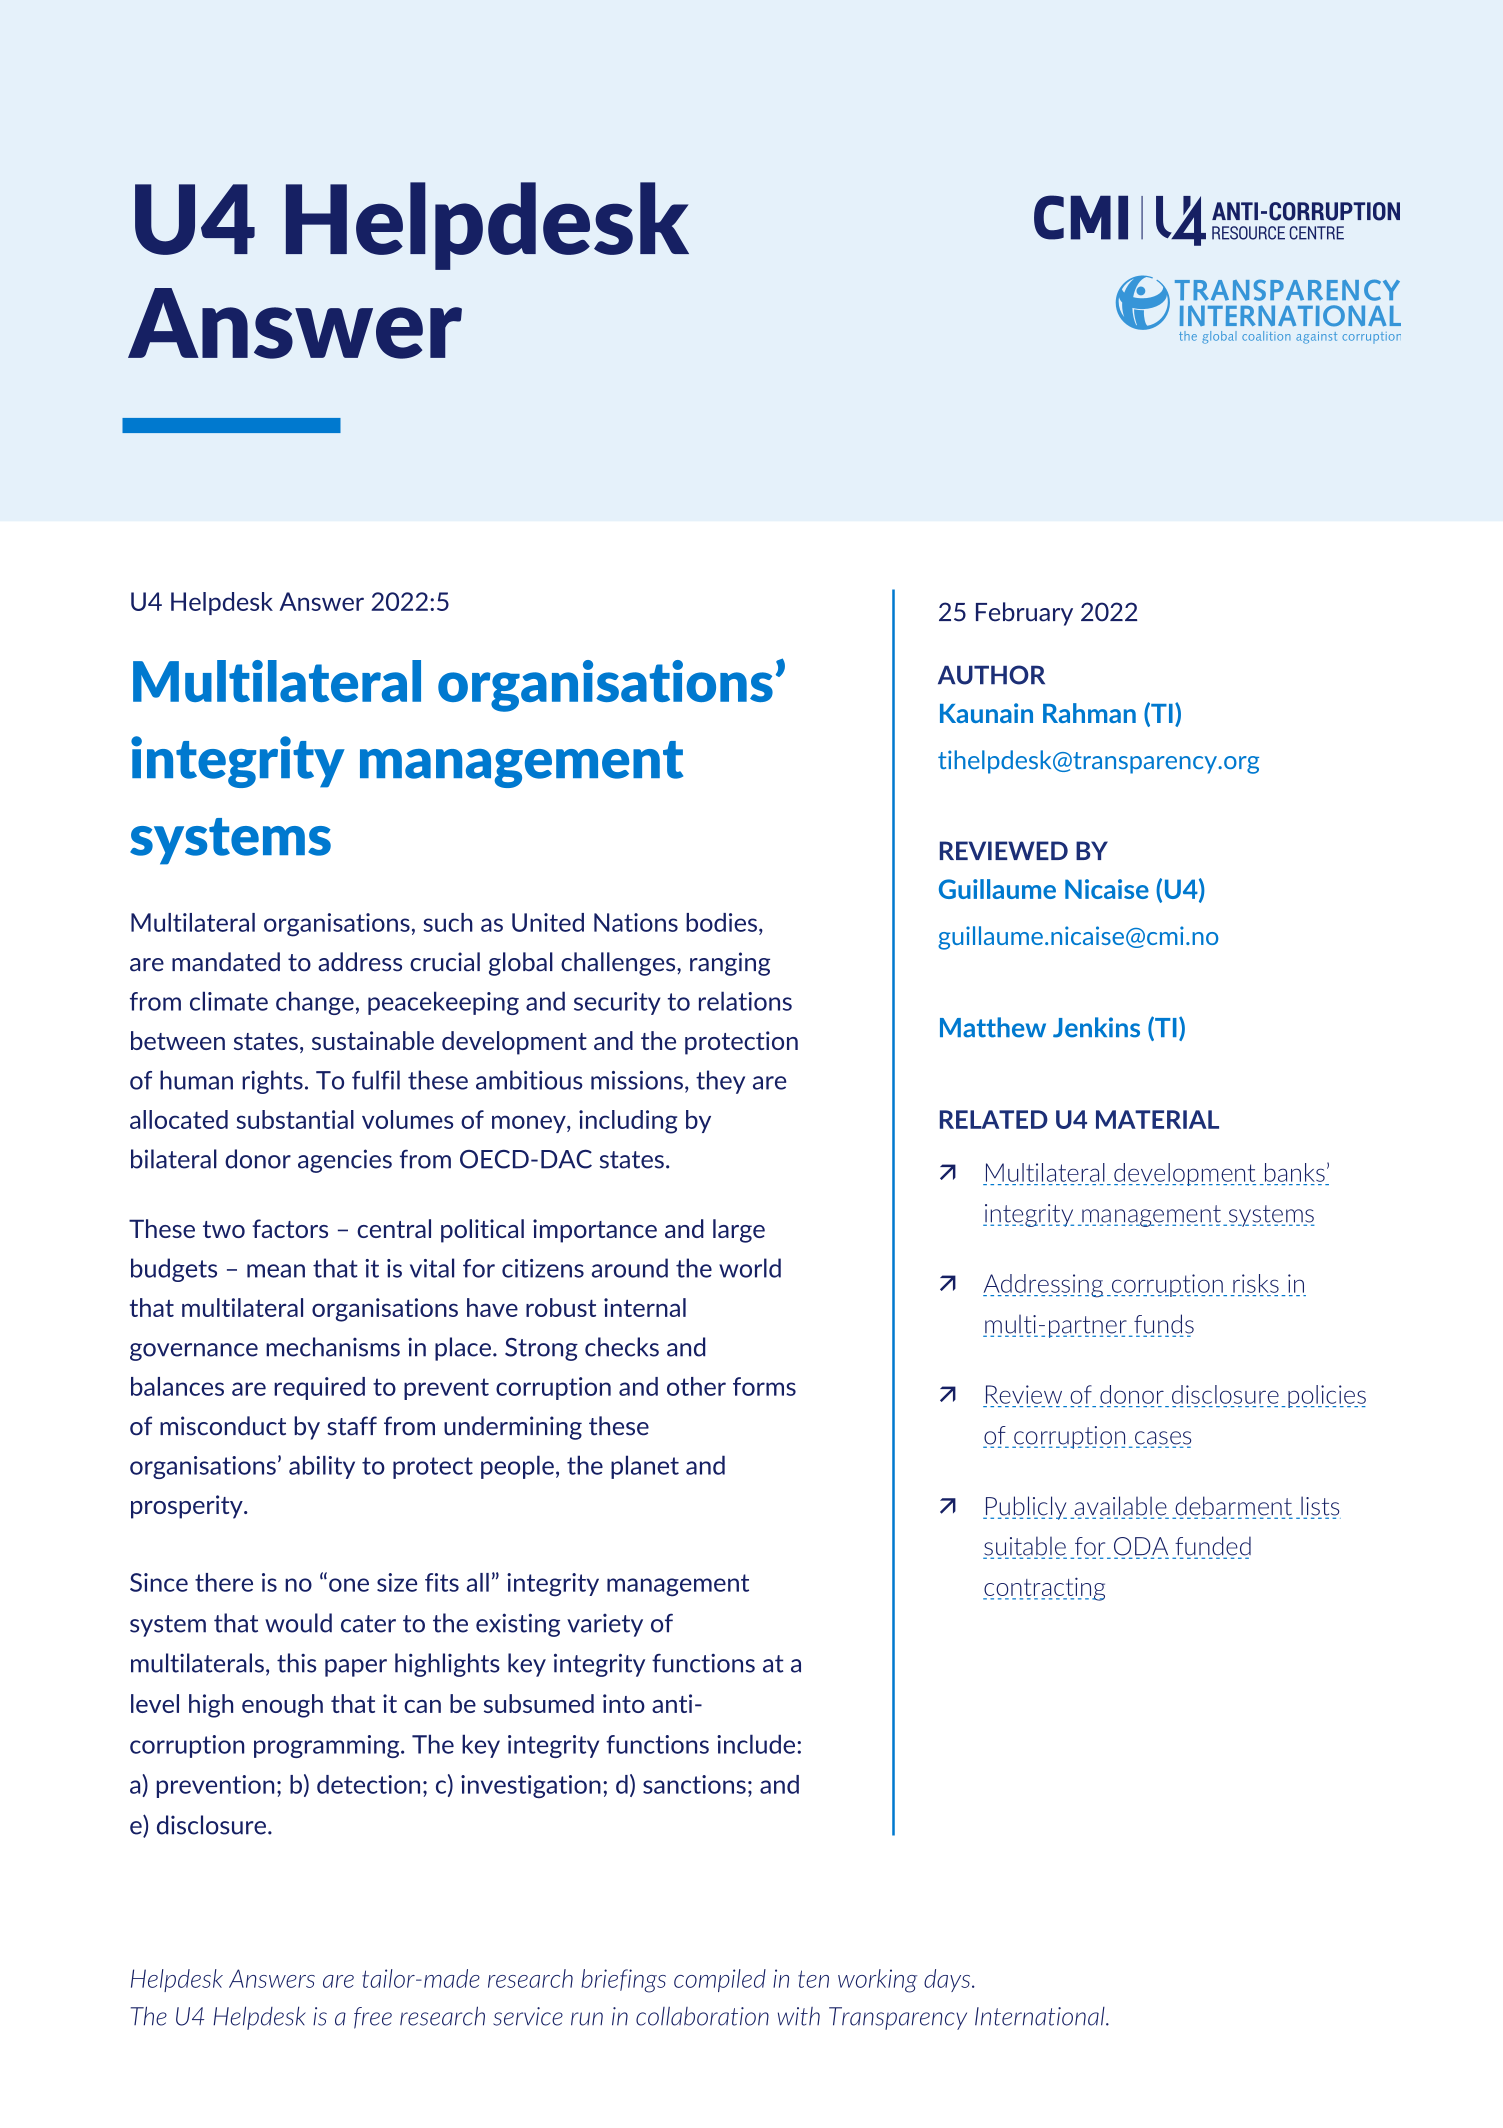 Multilateral organisations’ integrity management systems